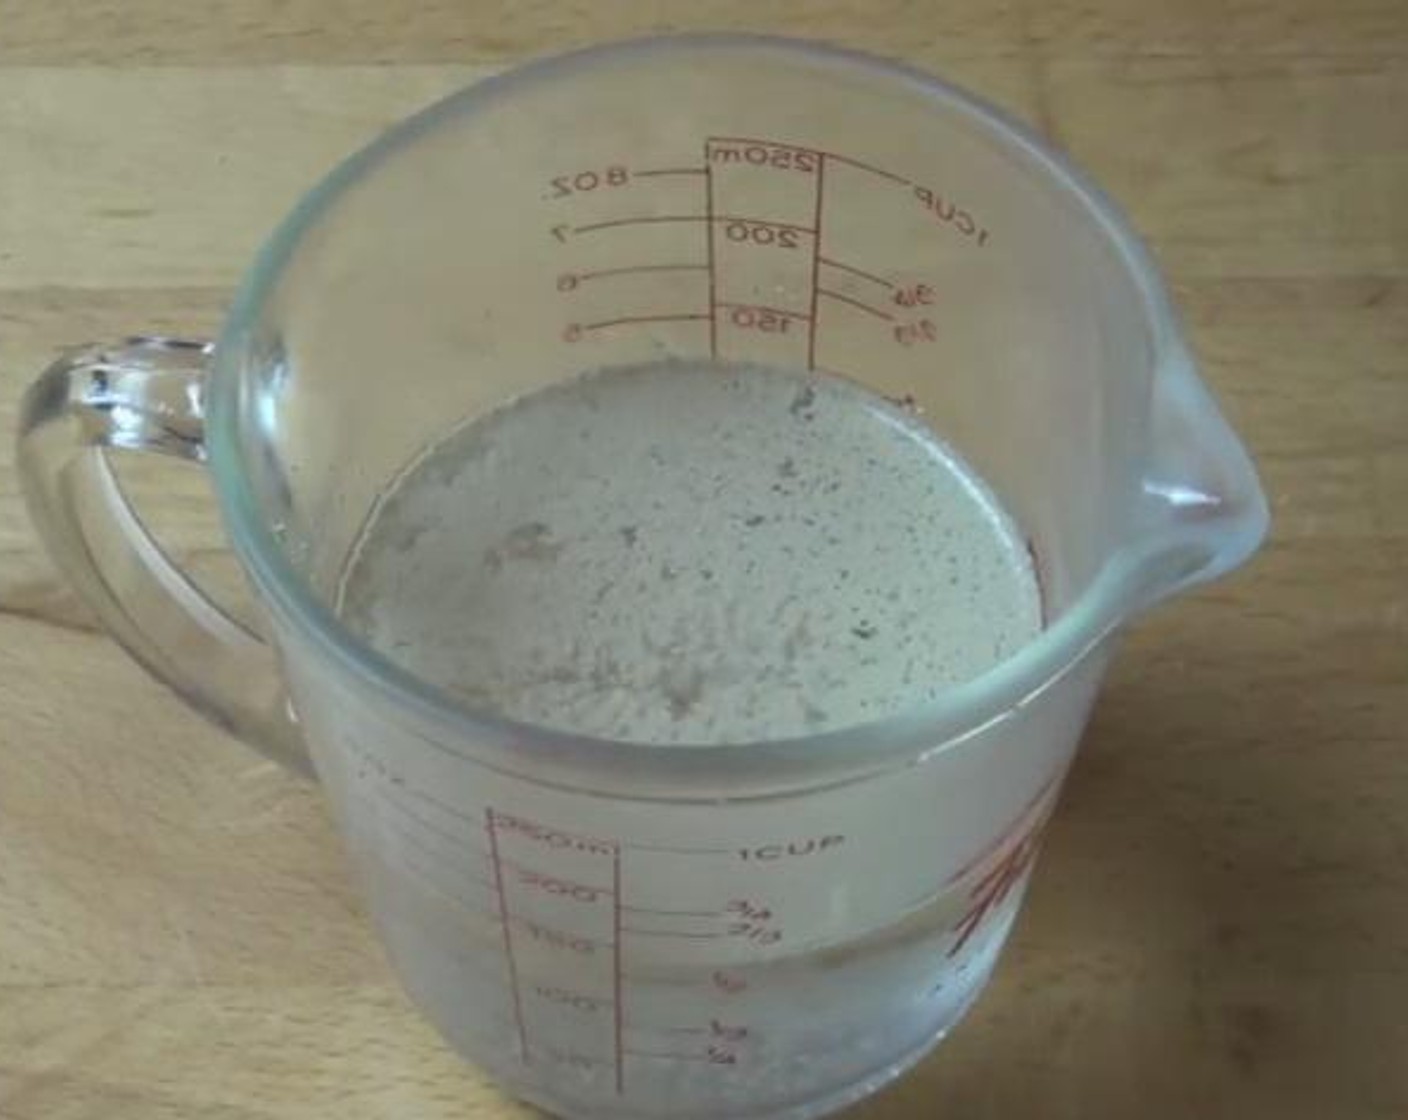 step 2 Into a small jug, add the Water (1/2 cup), Instant Dry Yeast (1/4 tsp), and Granulated Sugar (1 pinch). Stir through and set aside for about ten minutes until it is nice and firm.